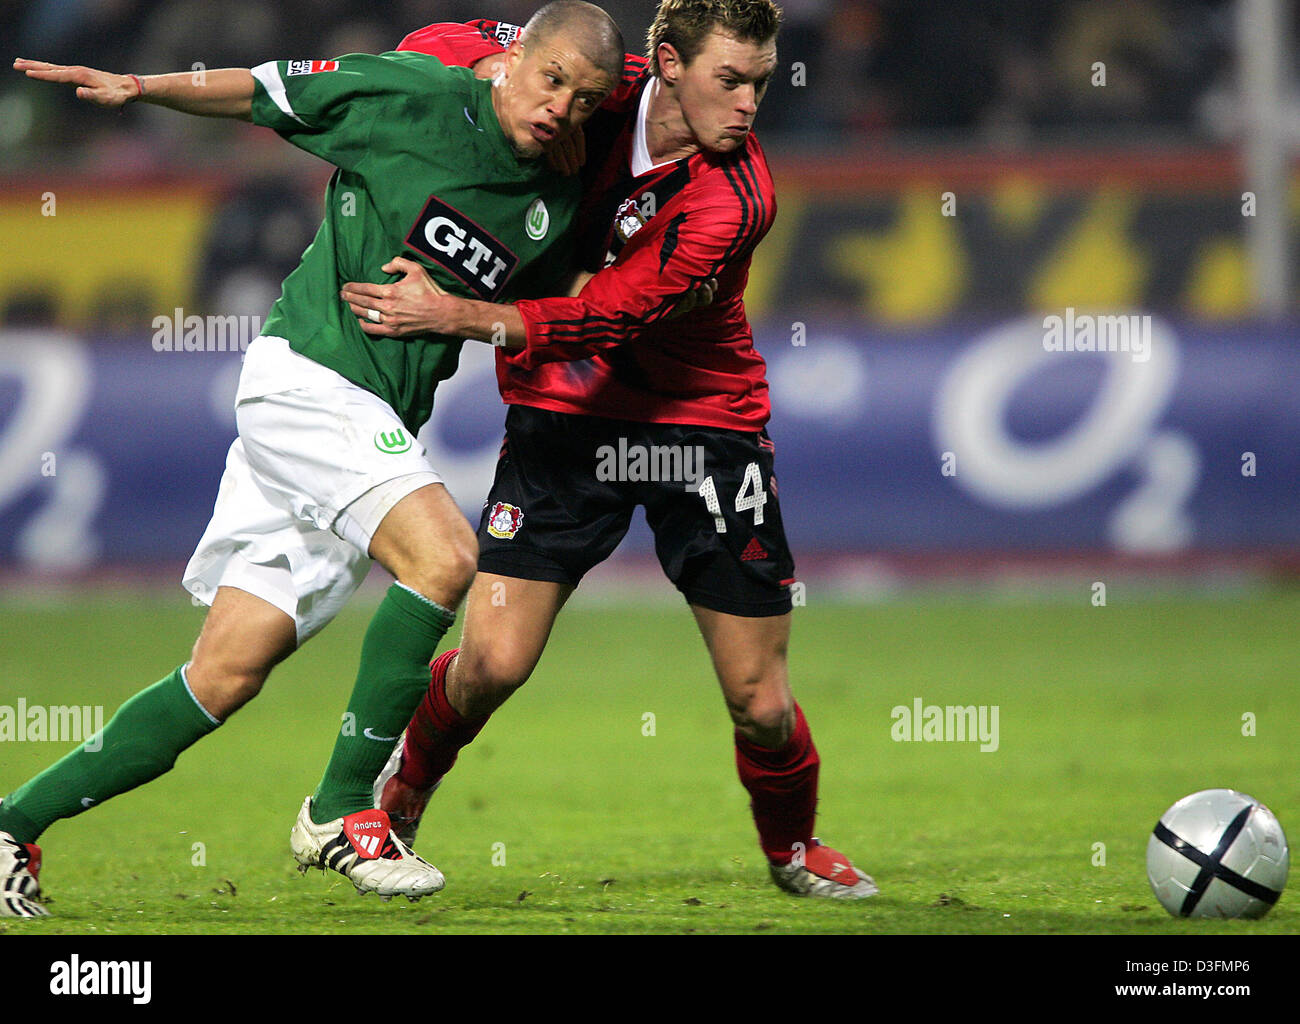 (dpa) - Leverkusen midfielder Hanno Balitsch (R) tries to stop Wolfsburg midfield mastermind Andres D'Alessandro during the German Bundesliga match between Bayer 04 Leverkusen and VFL Wolfsburg at the BayArena in Leverkusen, Germany, 4 December 2004. Leverkusen came from behind to win the game 2-1. Stock Photo